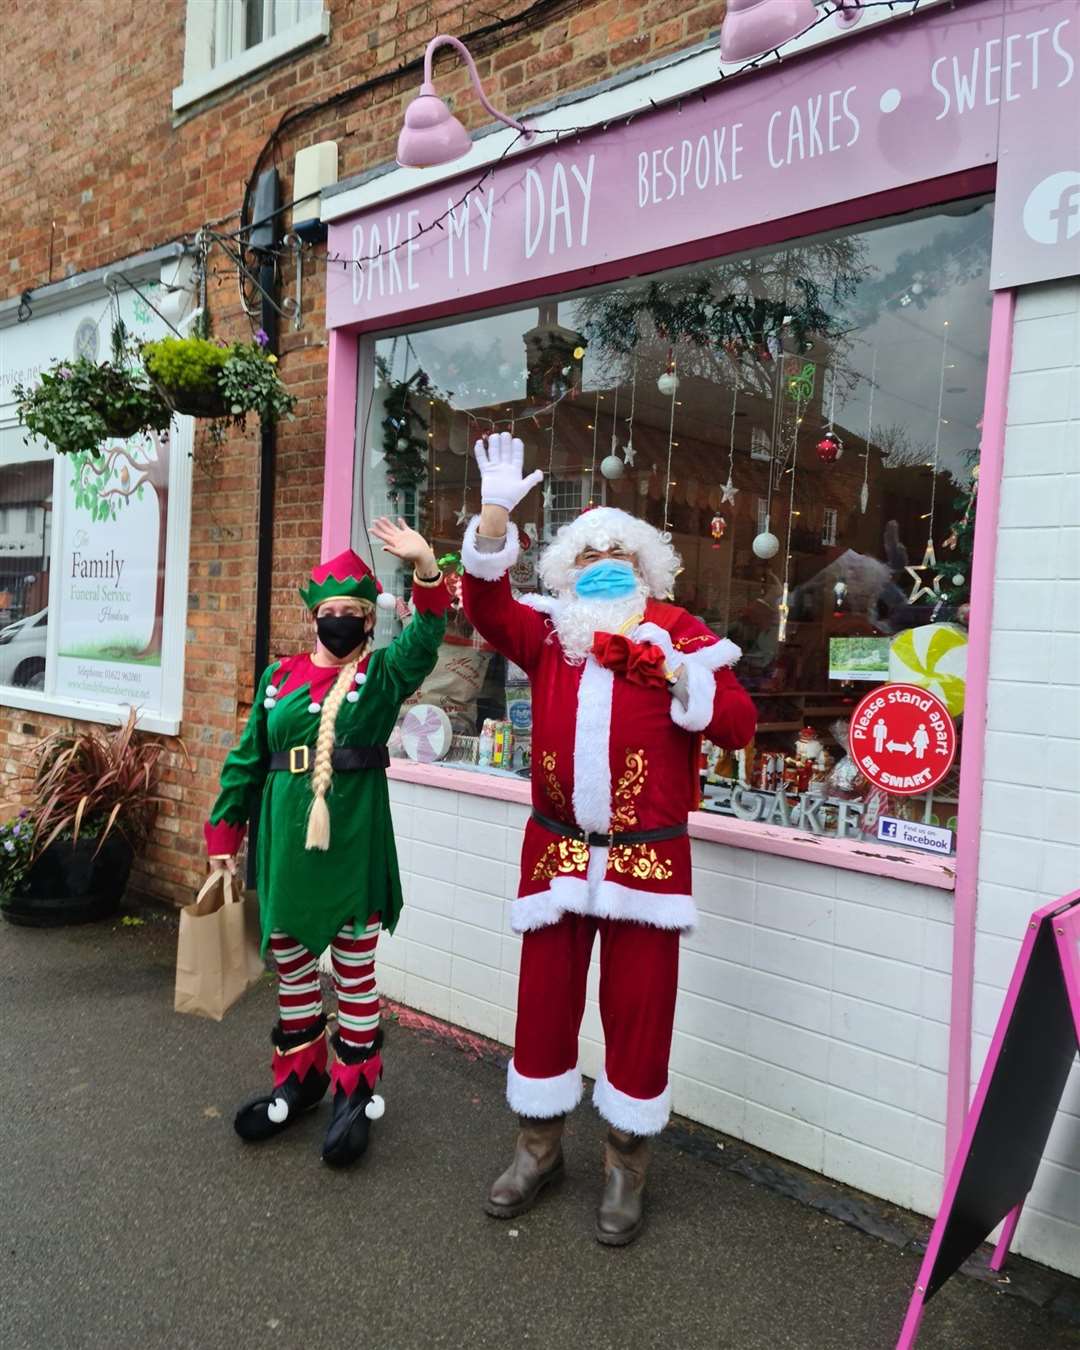 Richard and Victoria Berry from Bake My Day gave many Headcorn villagers a very happy Christmas